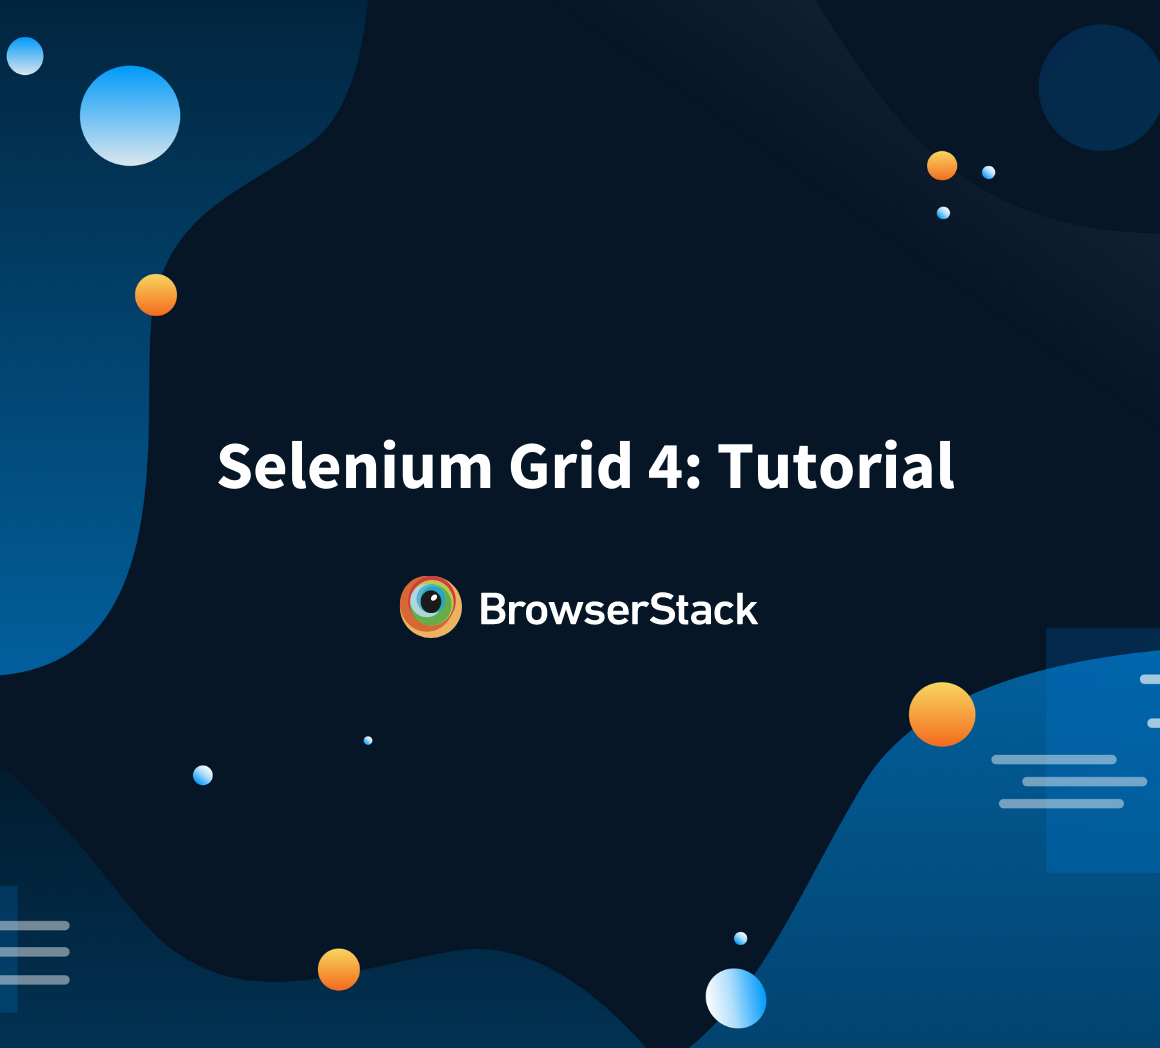 How to install and configure Selenium Grid 4